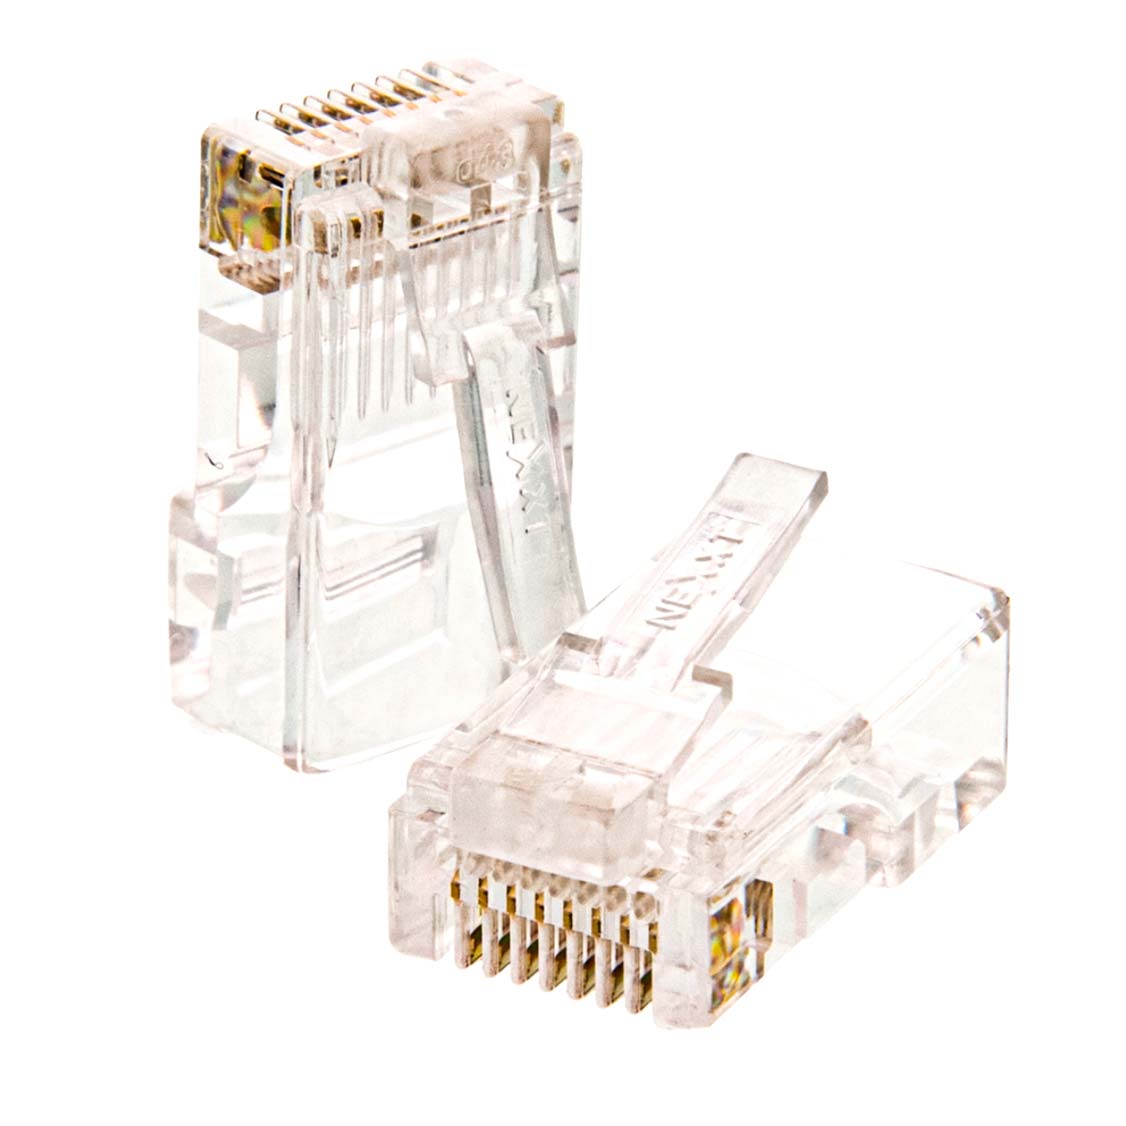 NEXXT CONECTOR RJ45 CAT6 – P/CABLE UTP – AW102NXT04 – Tienda CorchaCR